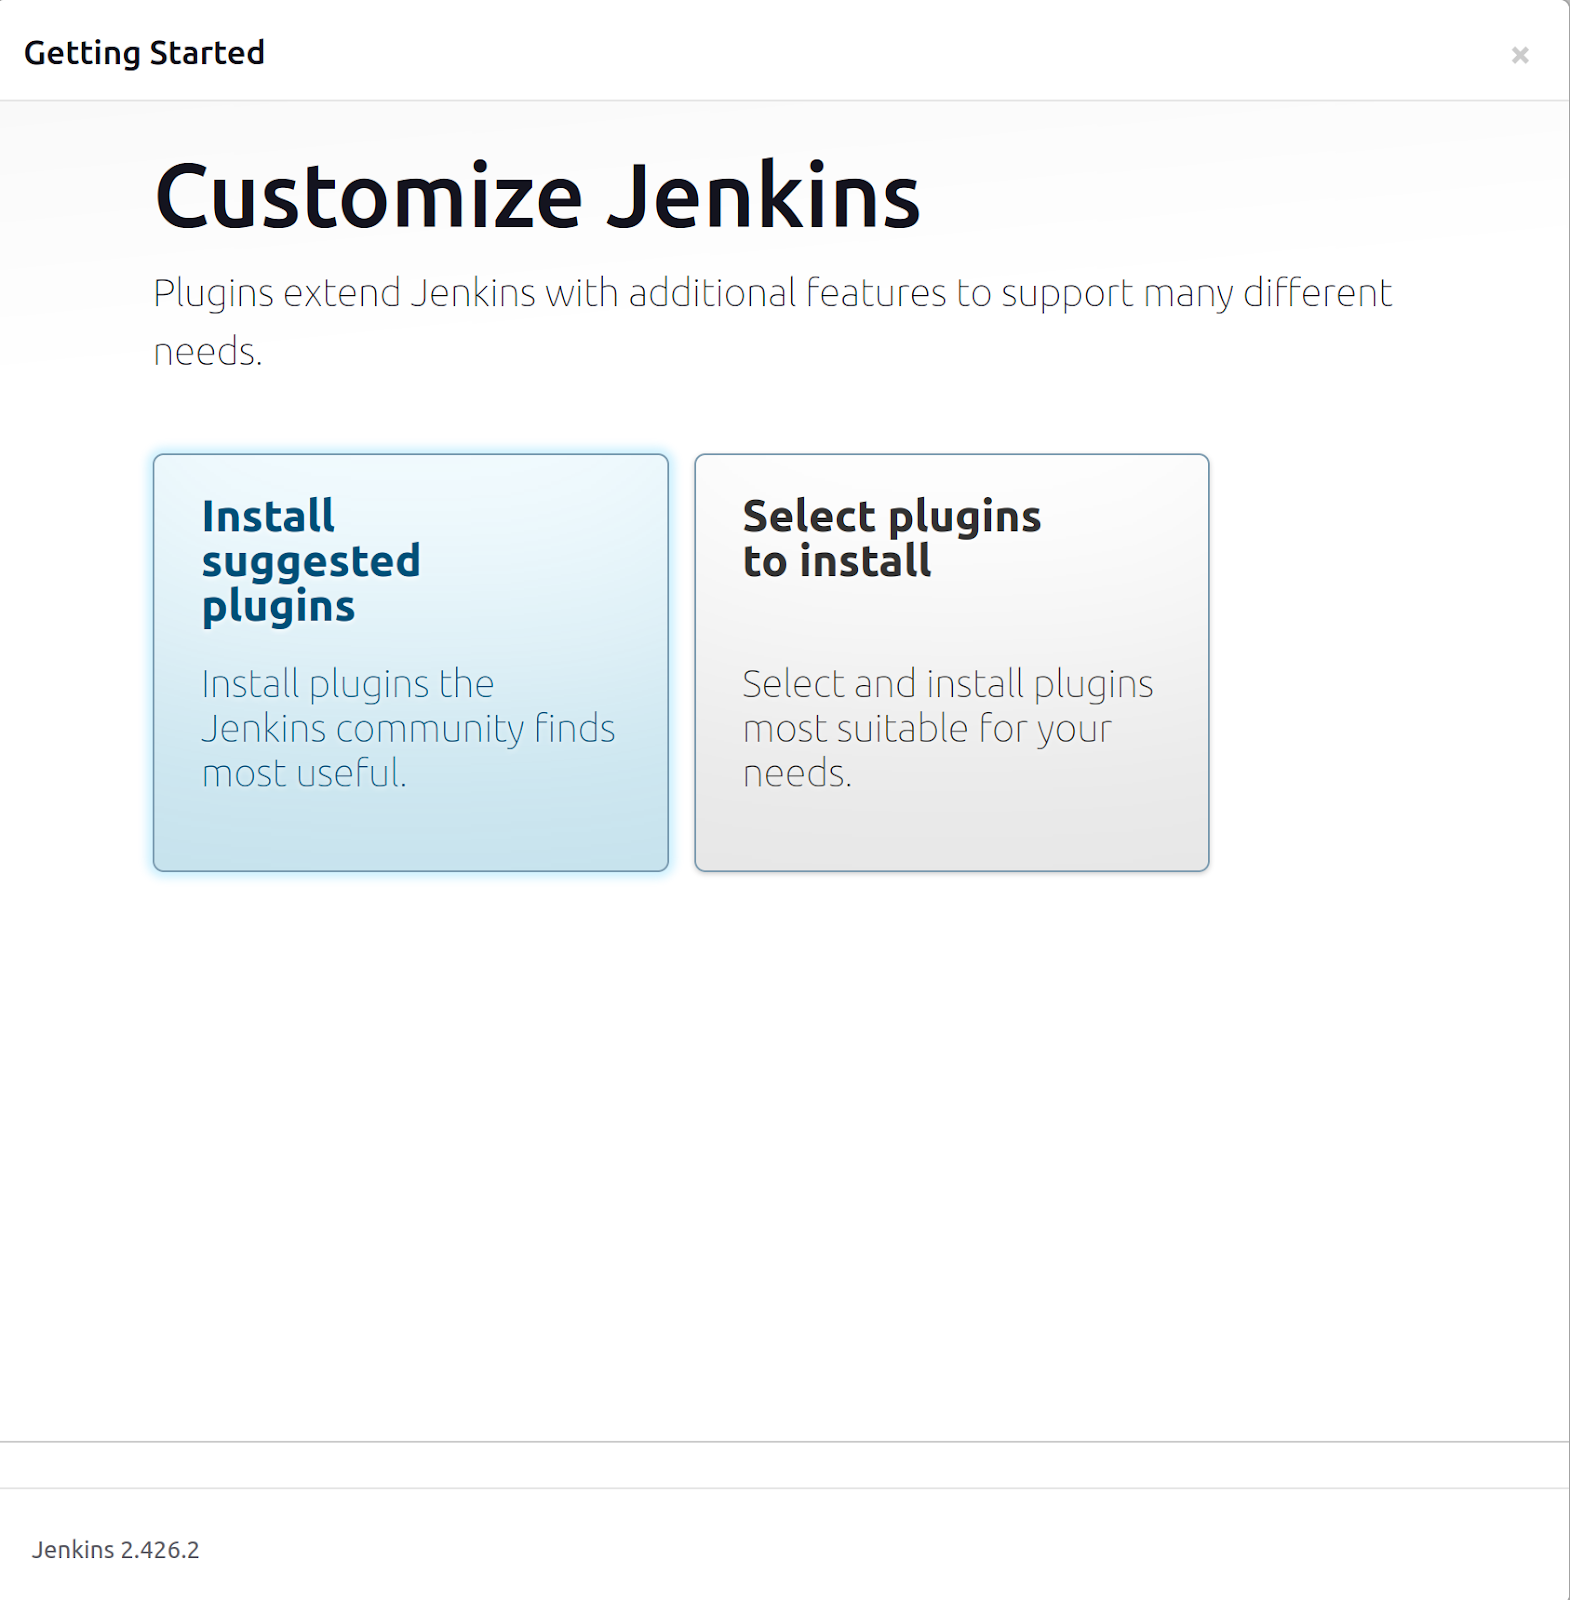 Getting started with customized Jenkins